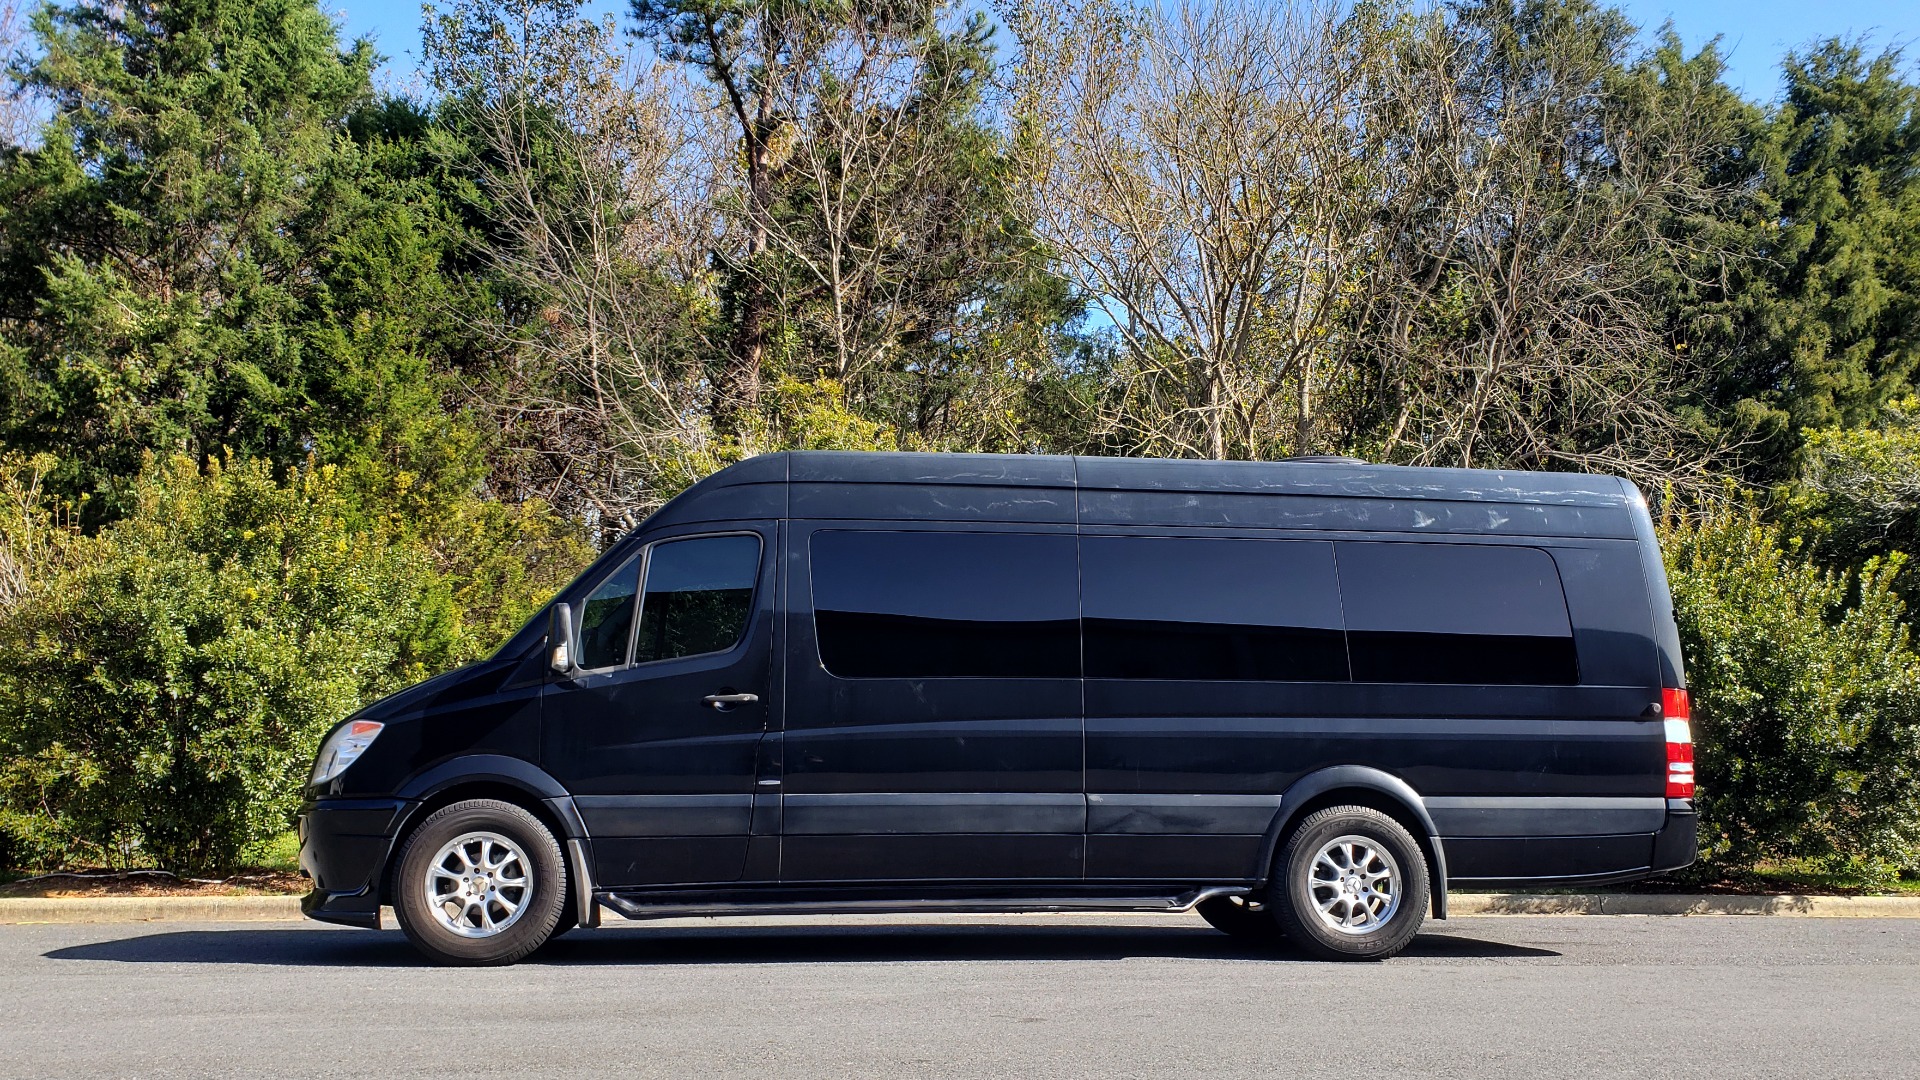 Used 2013 Mercedes-Benz SPRINTER CARGO VAN EXT / OFFICE ON WHEELS / FLT SCREEN TV / LOUNGE for sale Sold at Formula Imports in Charlotte NC 28227 2